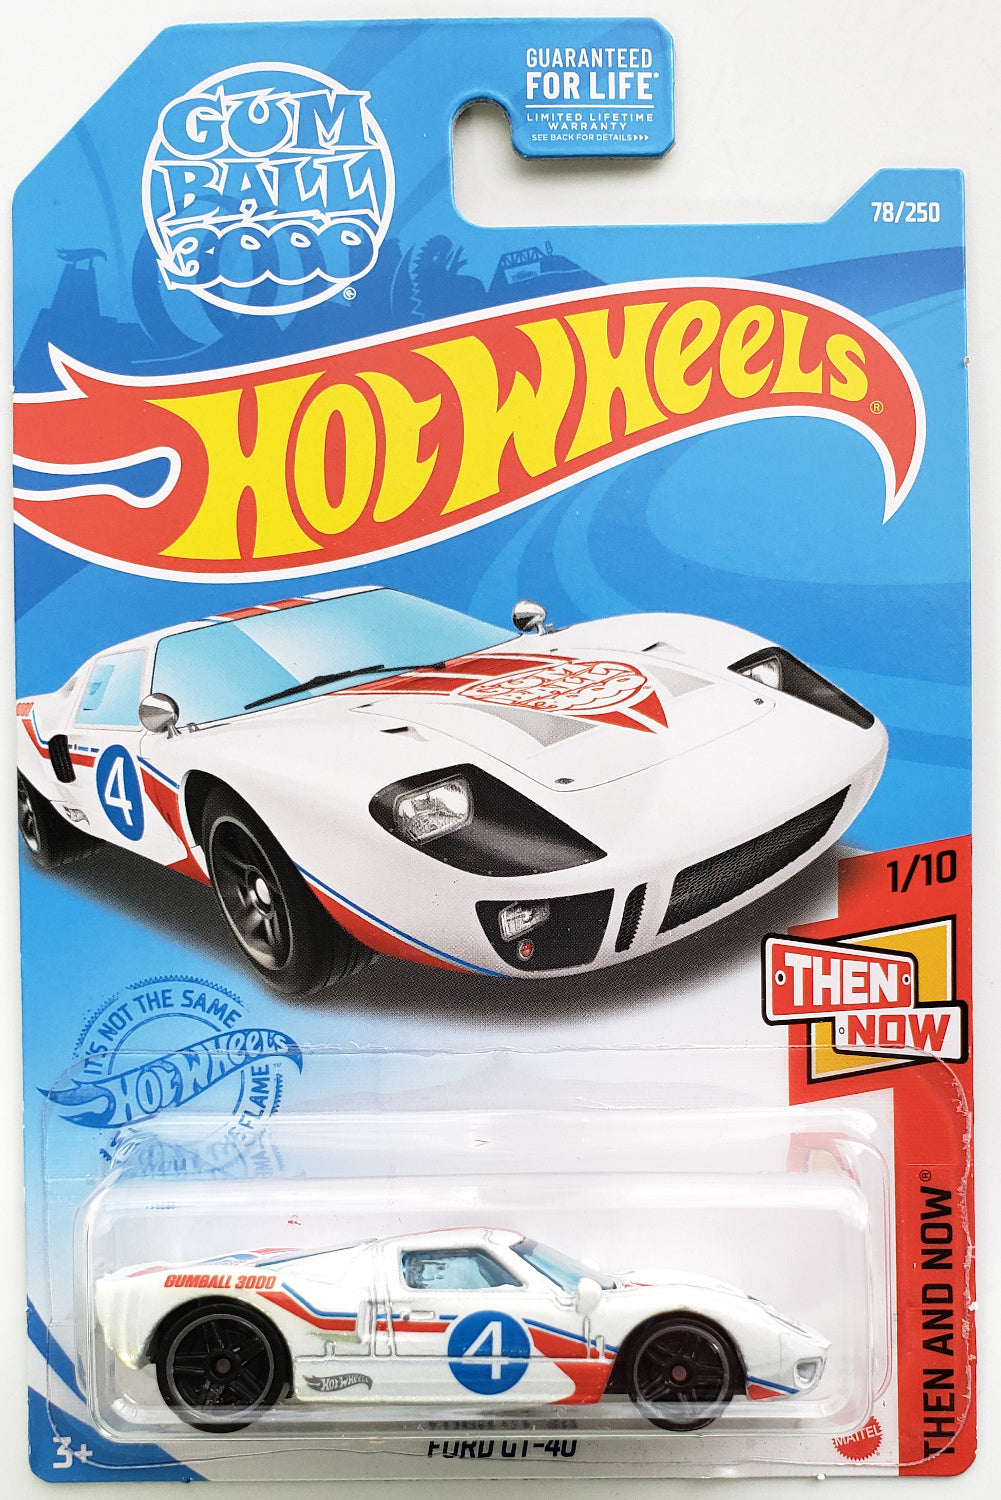 Hot Wheels 2021 - Collector # 078/250 - Then And Now 1/10 - Ford GT-40 - White / Gum Ball 3000